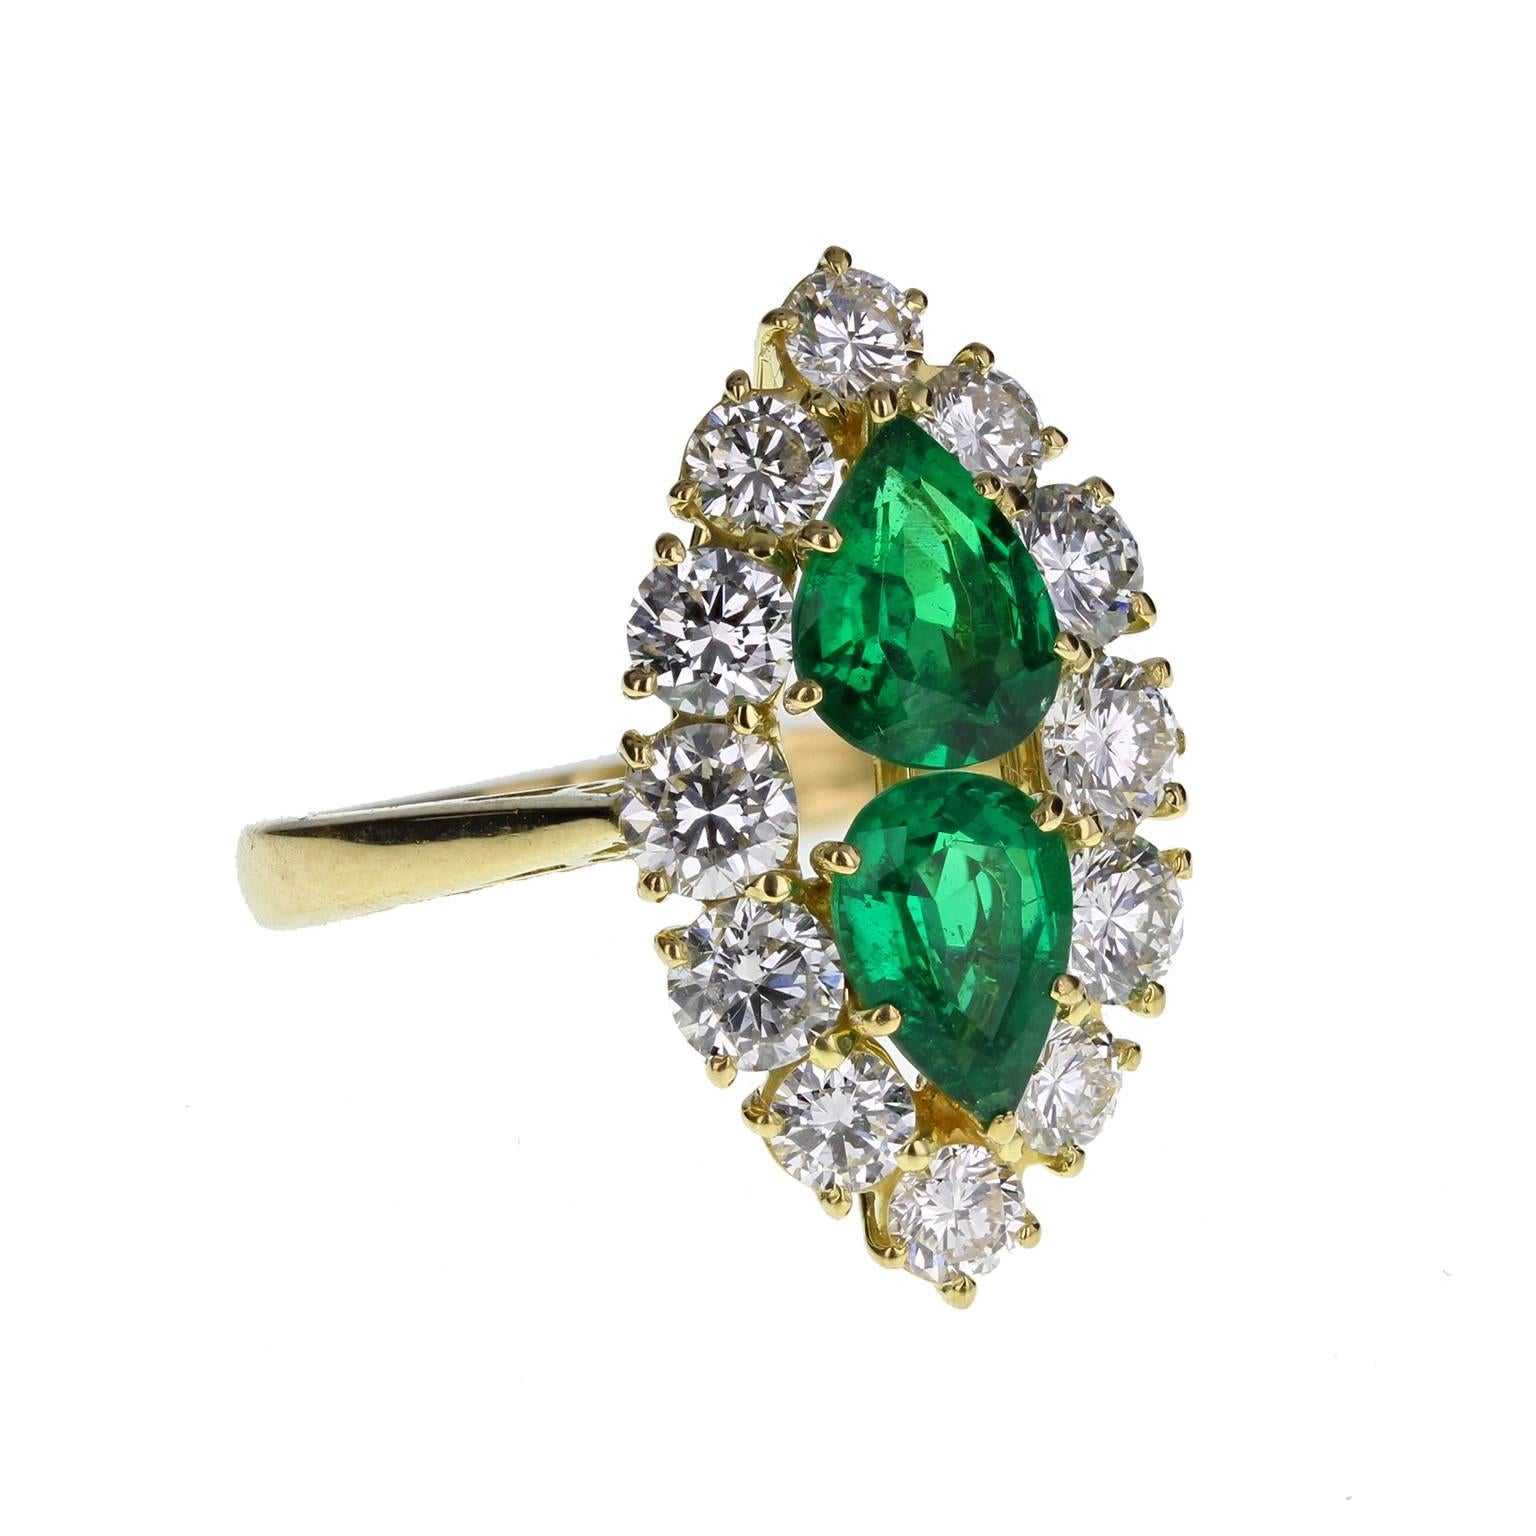 A fine and impressive cocktail ring featuring two deep, bottle-green pear shaped emeralds, surrounded generously with bright and lively diamonds to create a marquise-shaped cluster. Birmingham hallmark. A particularly fine quality ring at an